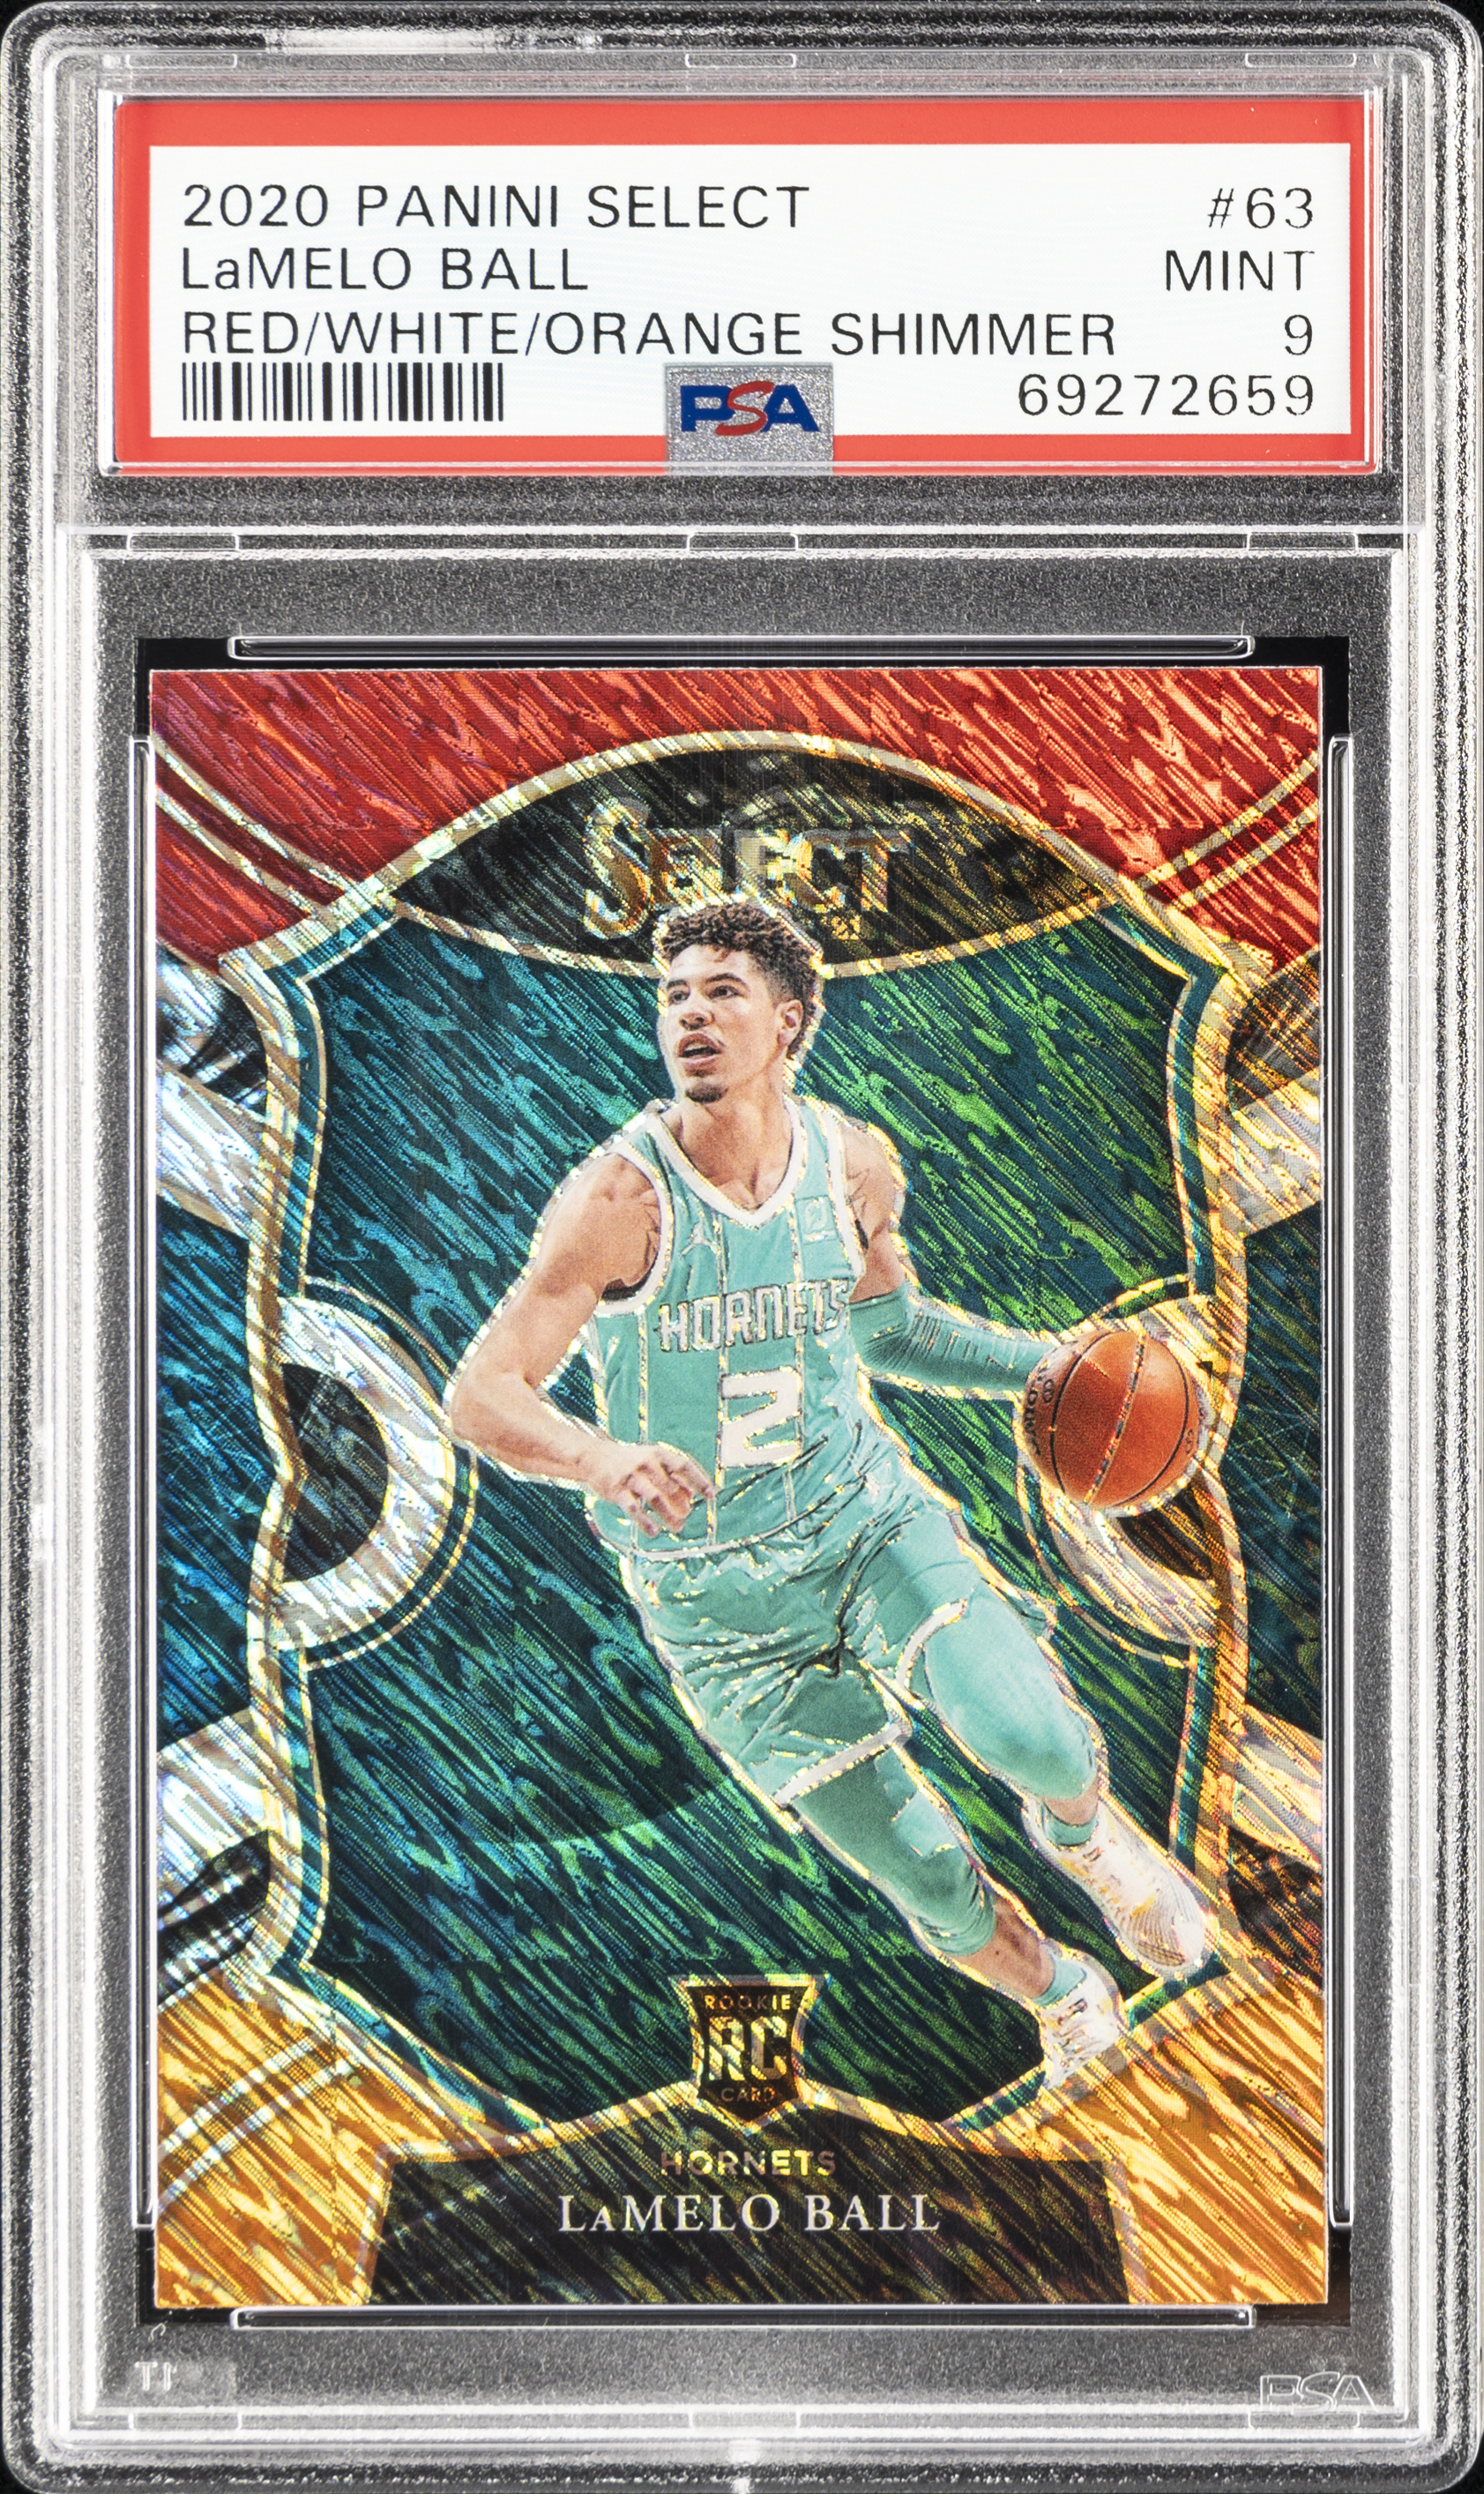 2020-21 Panini Select Red/White/Orange Shimmer #63 LaMelo Ball Rookie Card – PSA MINT 9